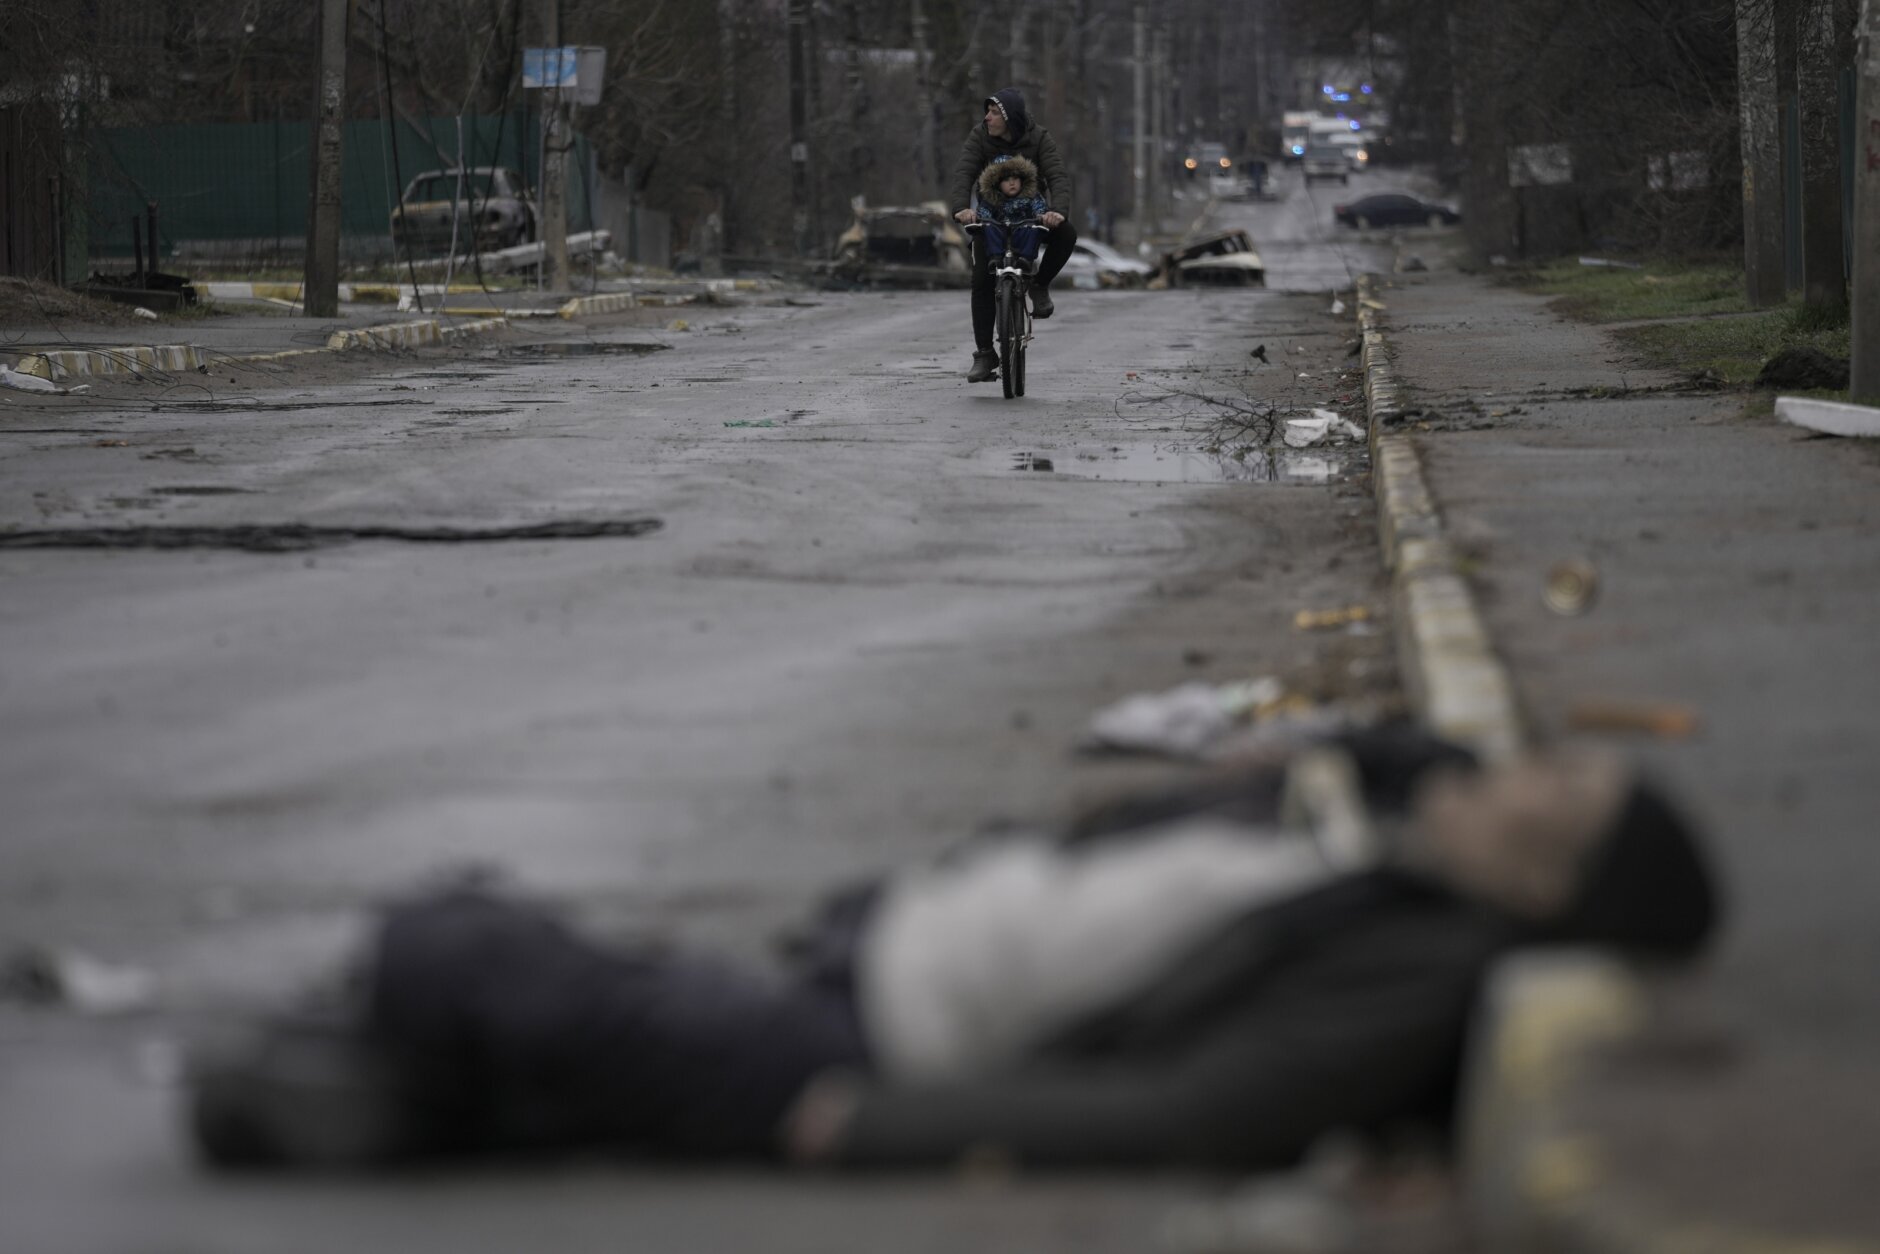 A man and child ride on a bicycle as bodies of civilians lie in the street in the formerly Russian-occupied Kyiv suburb of Bucha, Ukraine, Saturday, April 2, 2022. (AP Photo/Vadim Ghirda)